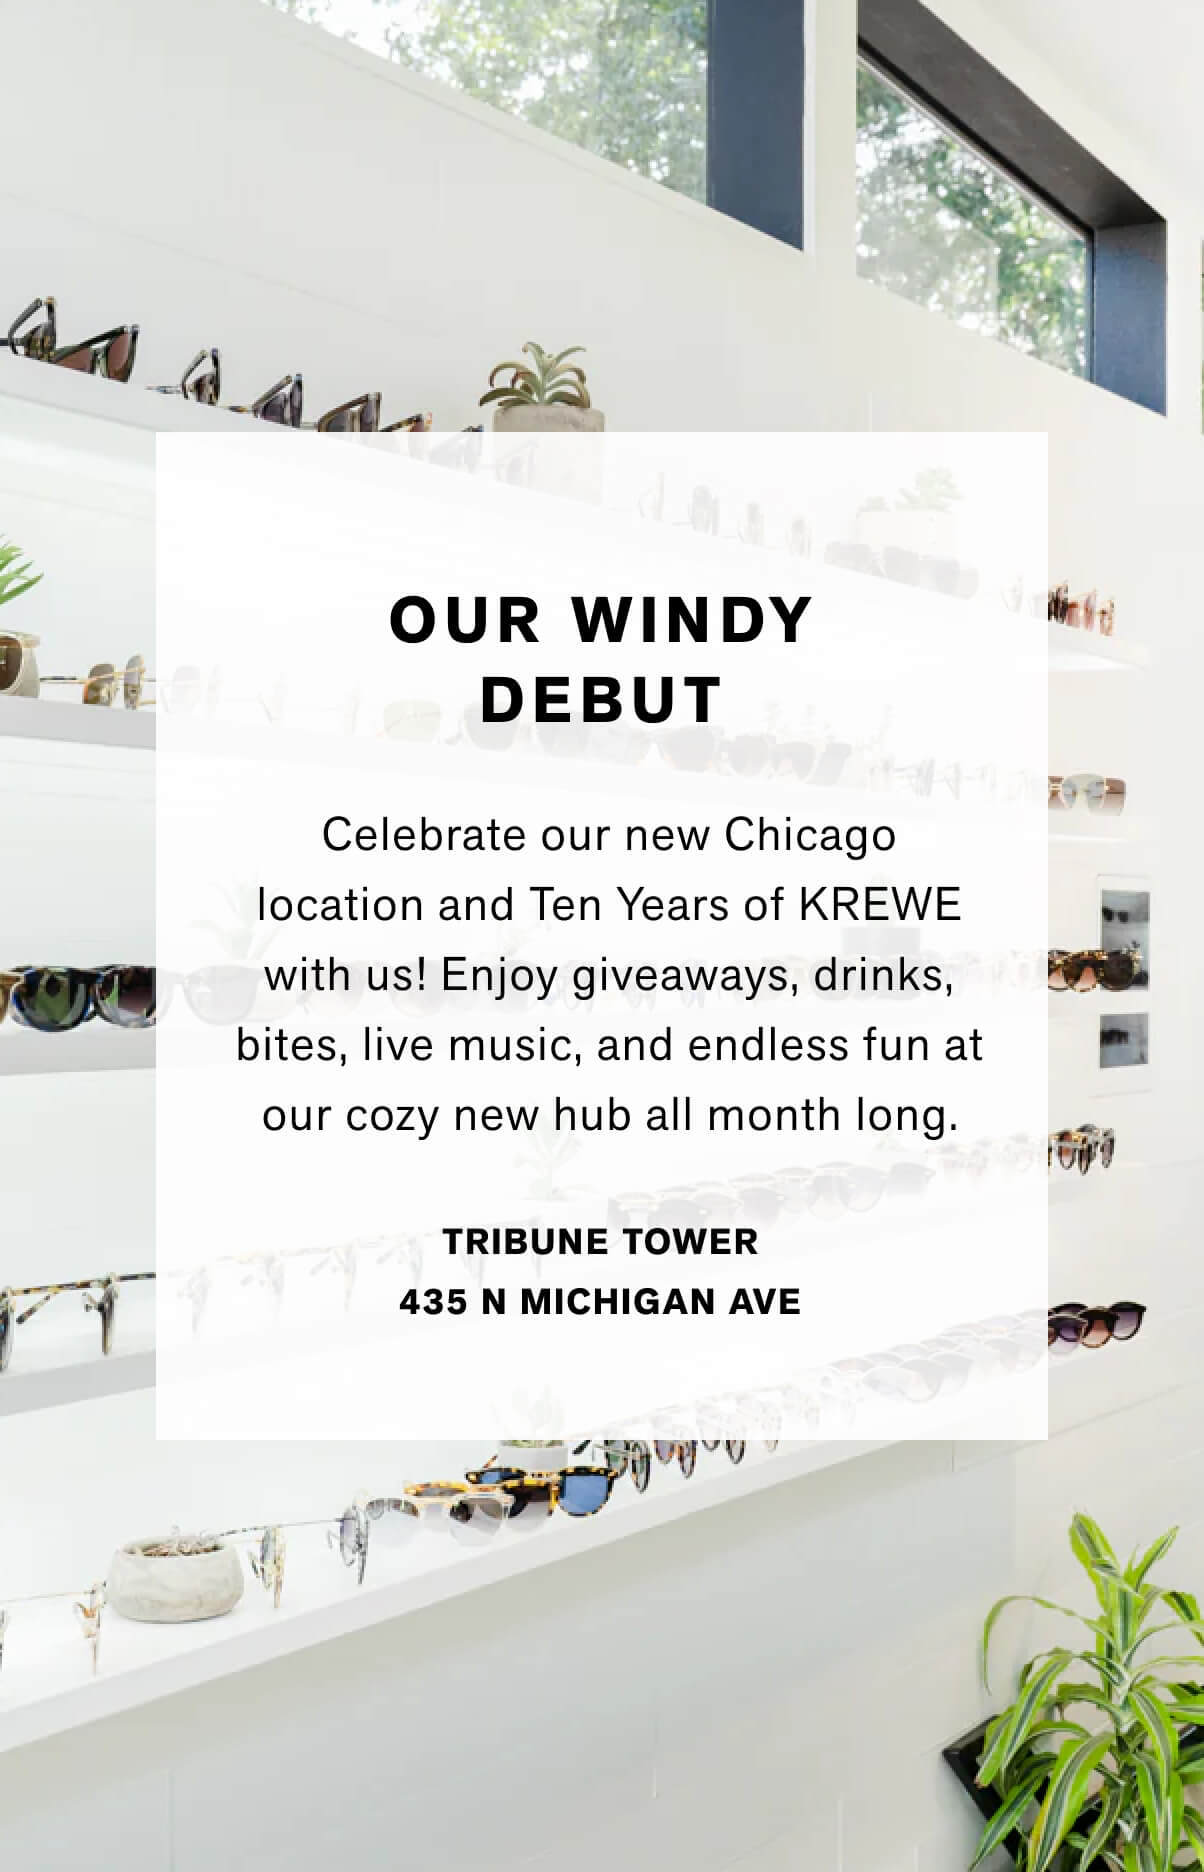 Our Windy Debut Celebrate our new Chicago location and Ten Years of KREWE with us! Enjoy giveaways, drinks, bites, live music and endless fun at our cozy new hub all month long.  Tribune tower  438 Michigan Ave